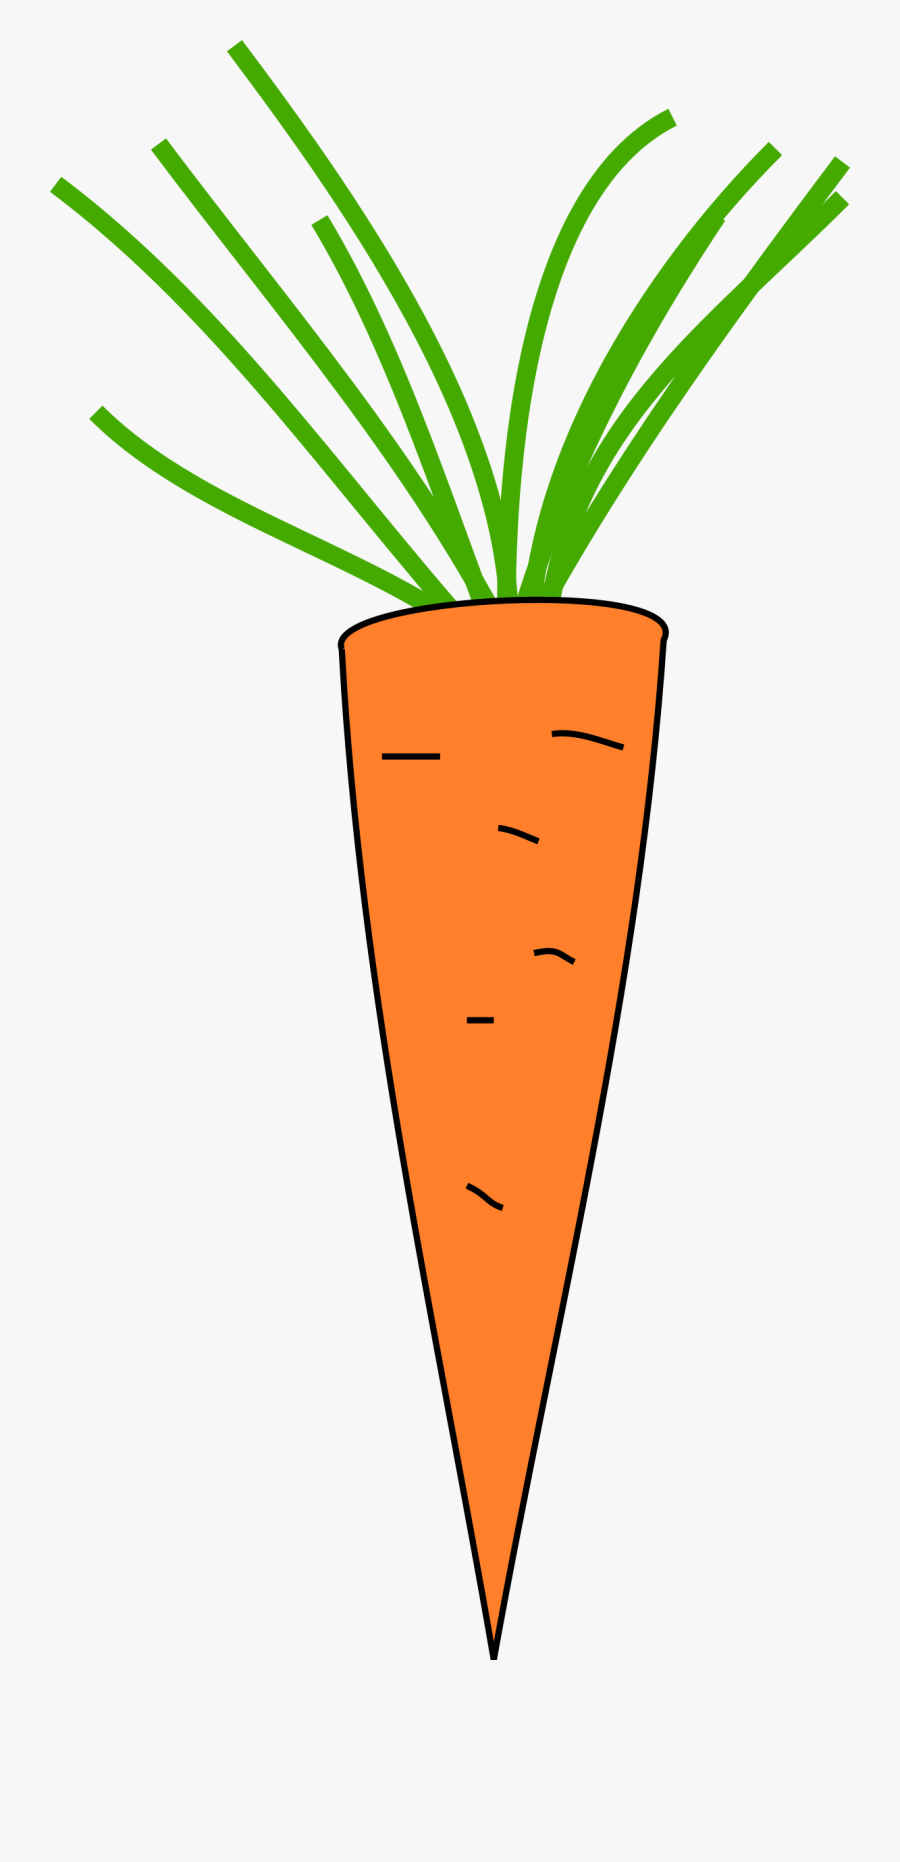 Free Download Copyright Free Carrot Clipart Carrot - Carrot Copyright Free, Transparent Clipart